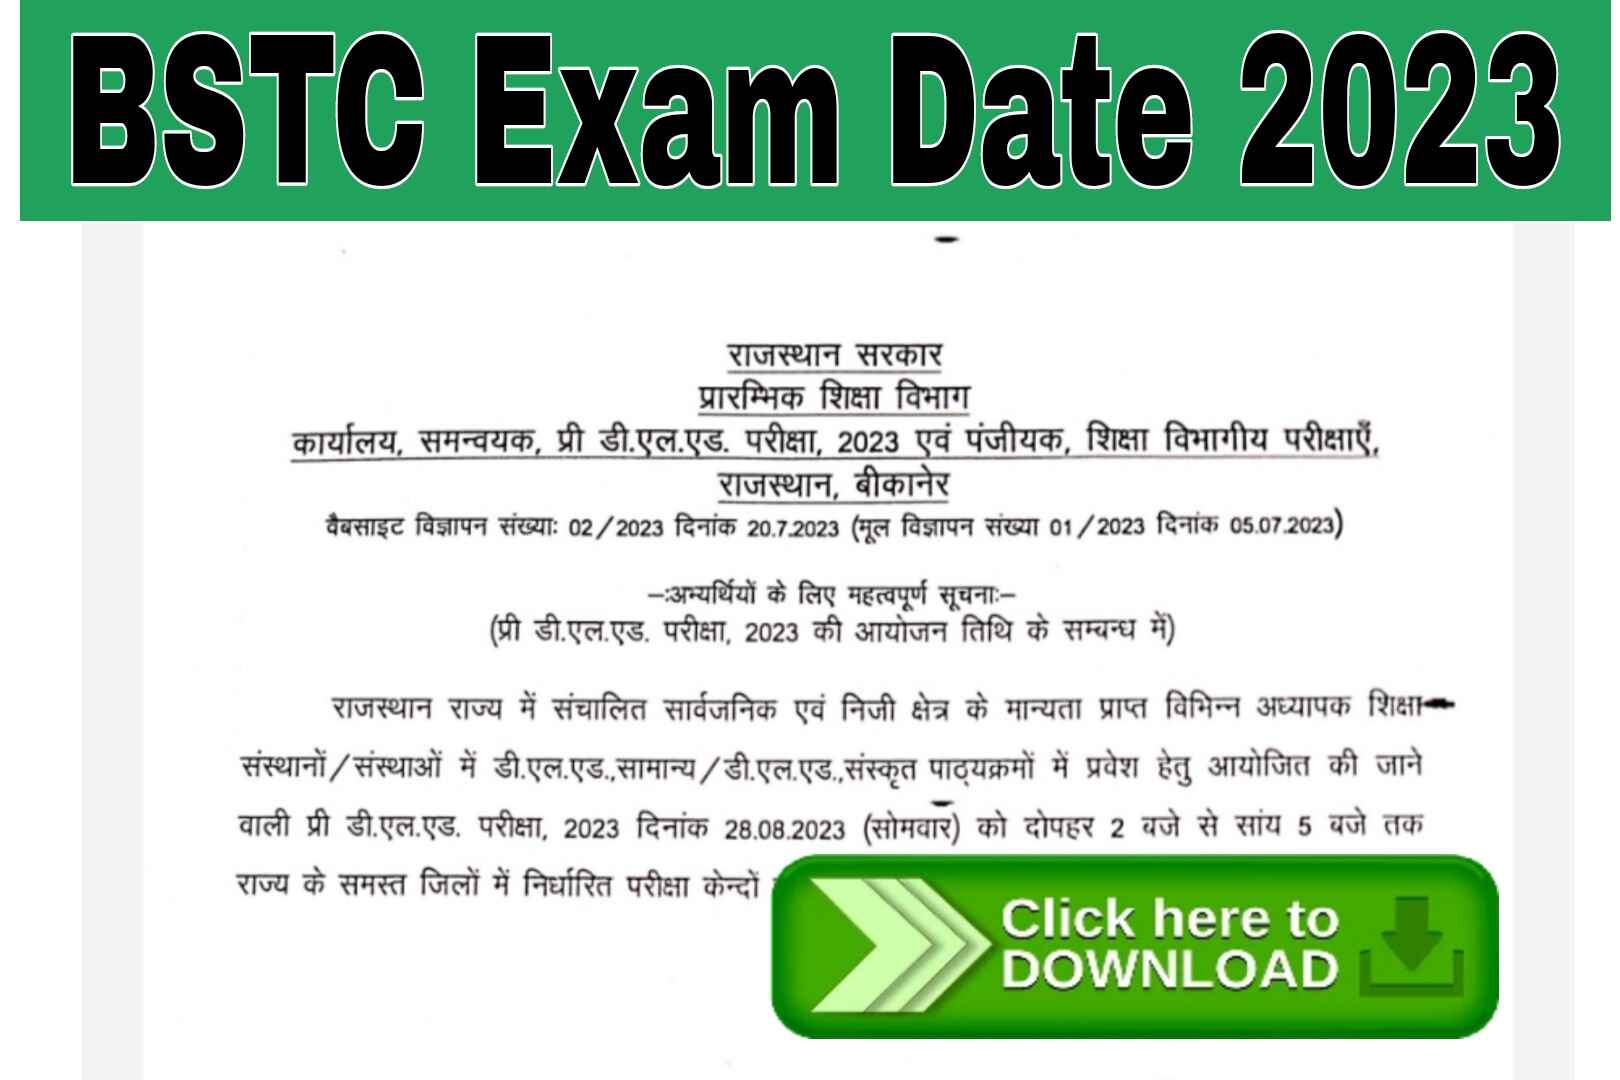 BSTC Exam Date 2023